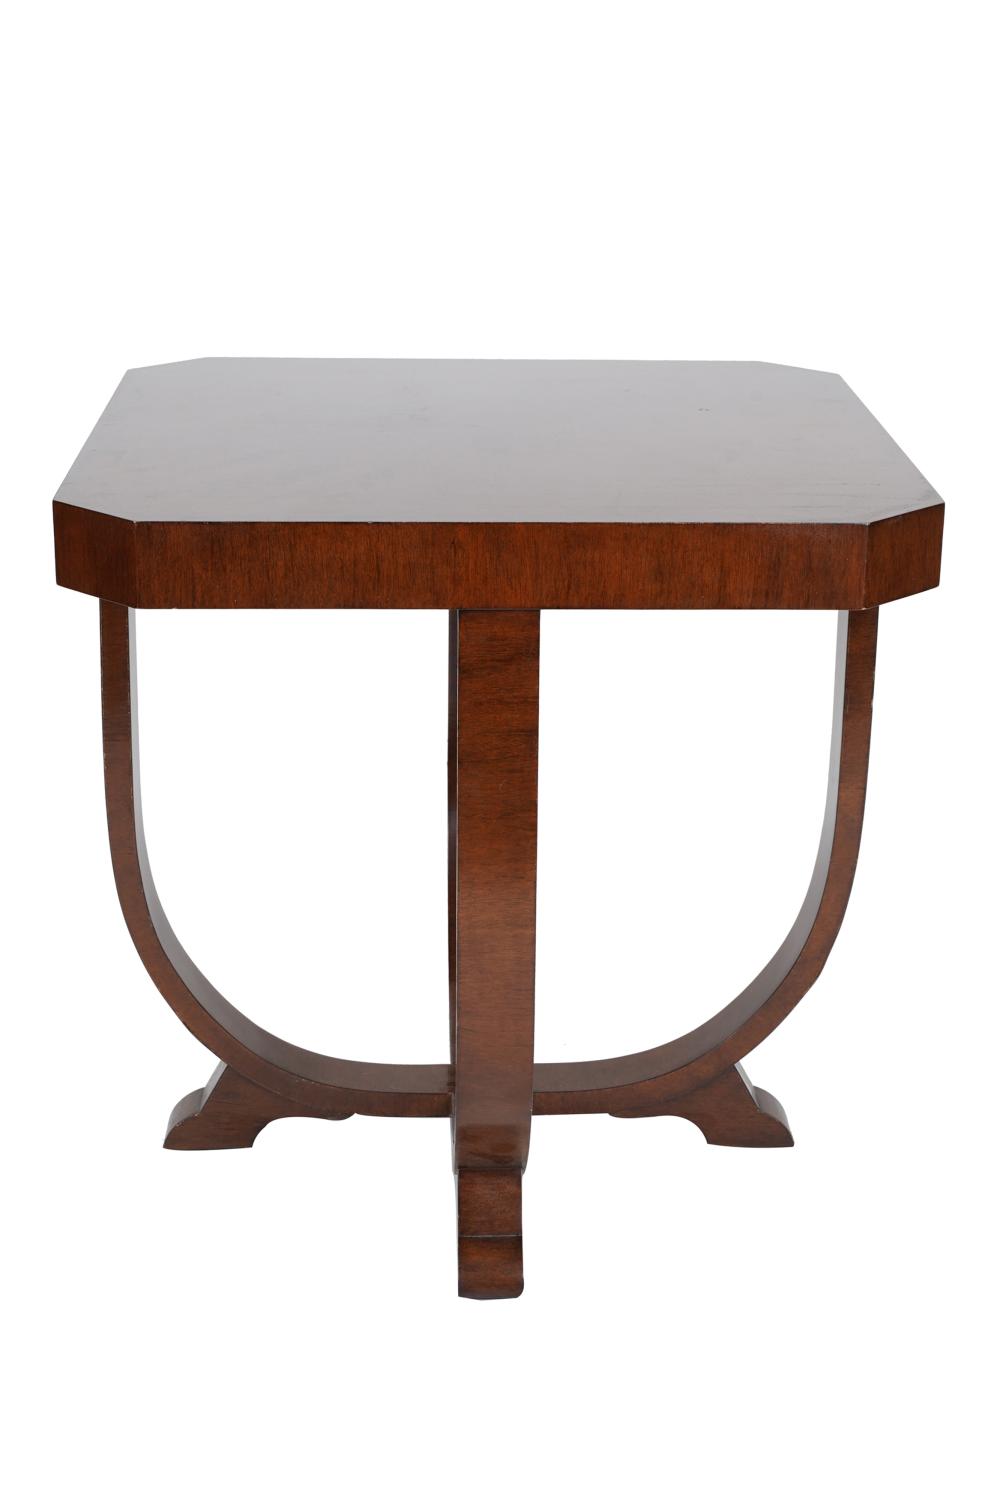 MAHOGANY ART DECO STYLE OCCASIONAL 33364a